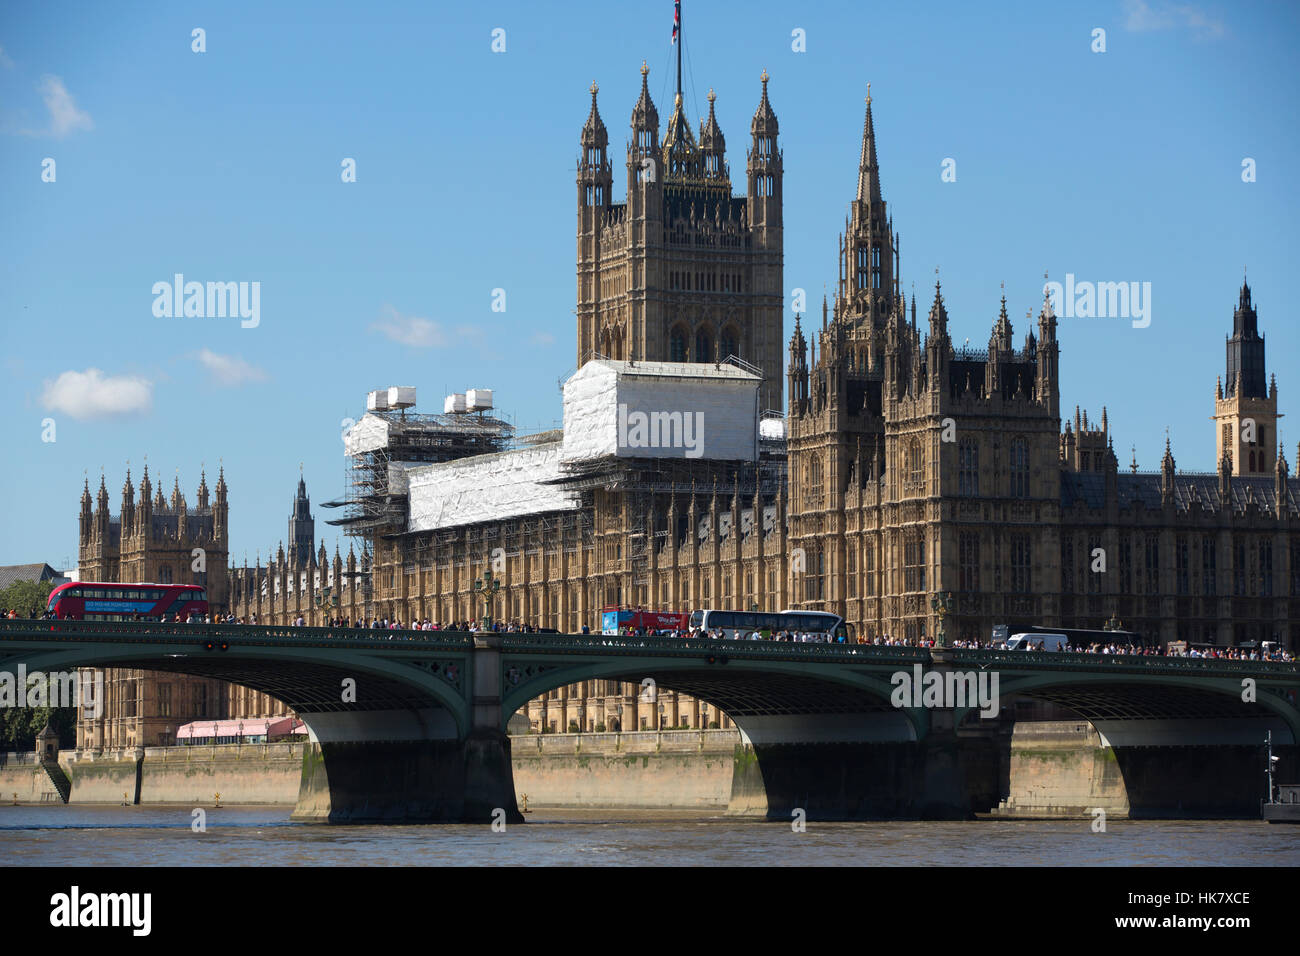 Houses of Parliament, part of the roof structure under renovation and repair work, Palace of Westminster, London, England, UK Stock Photo